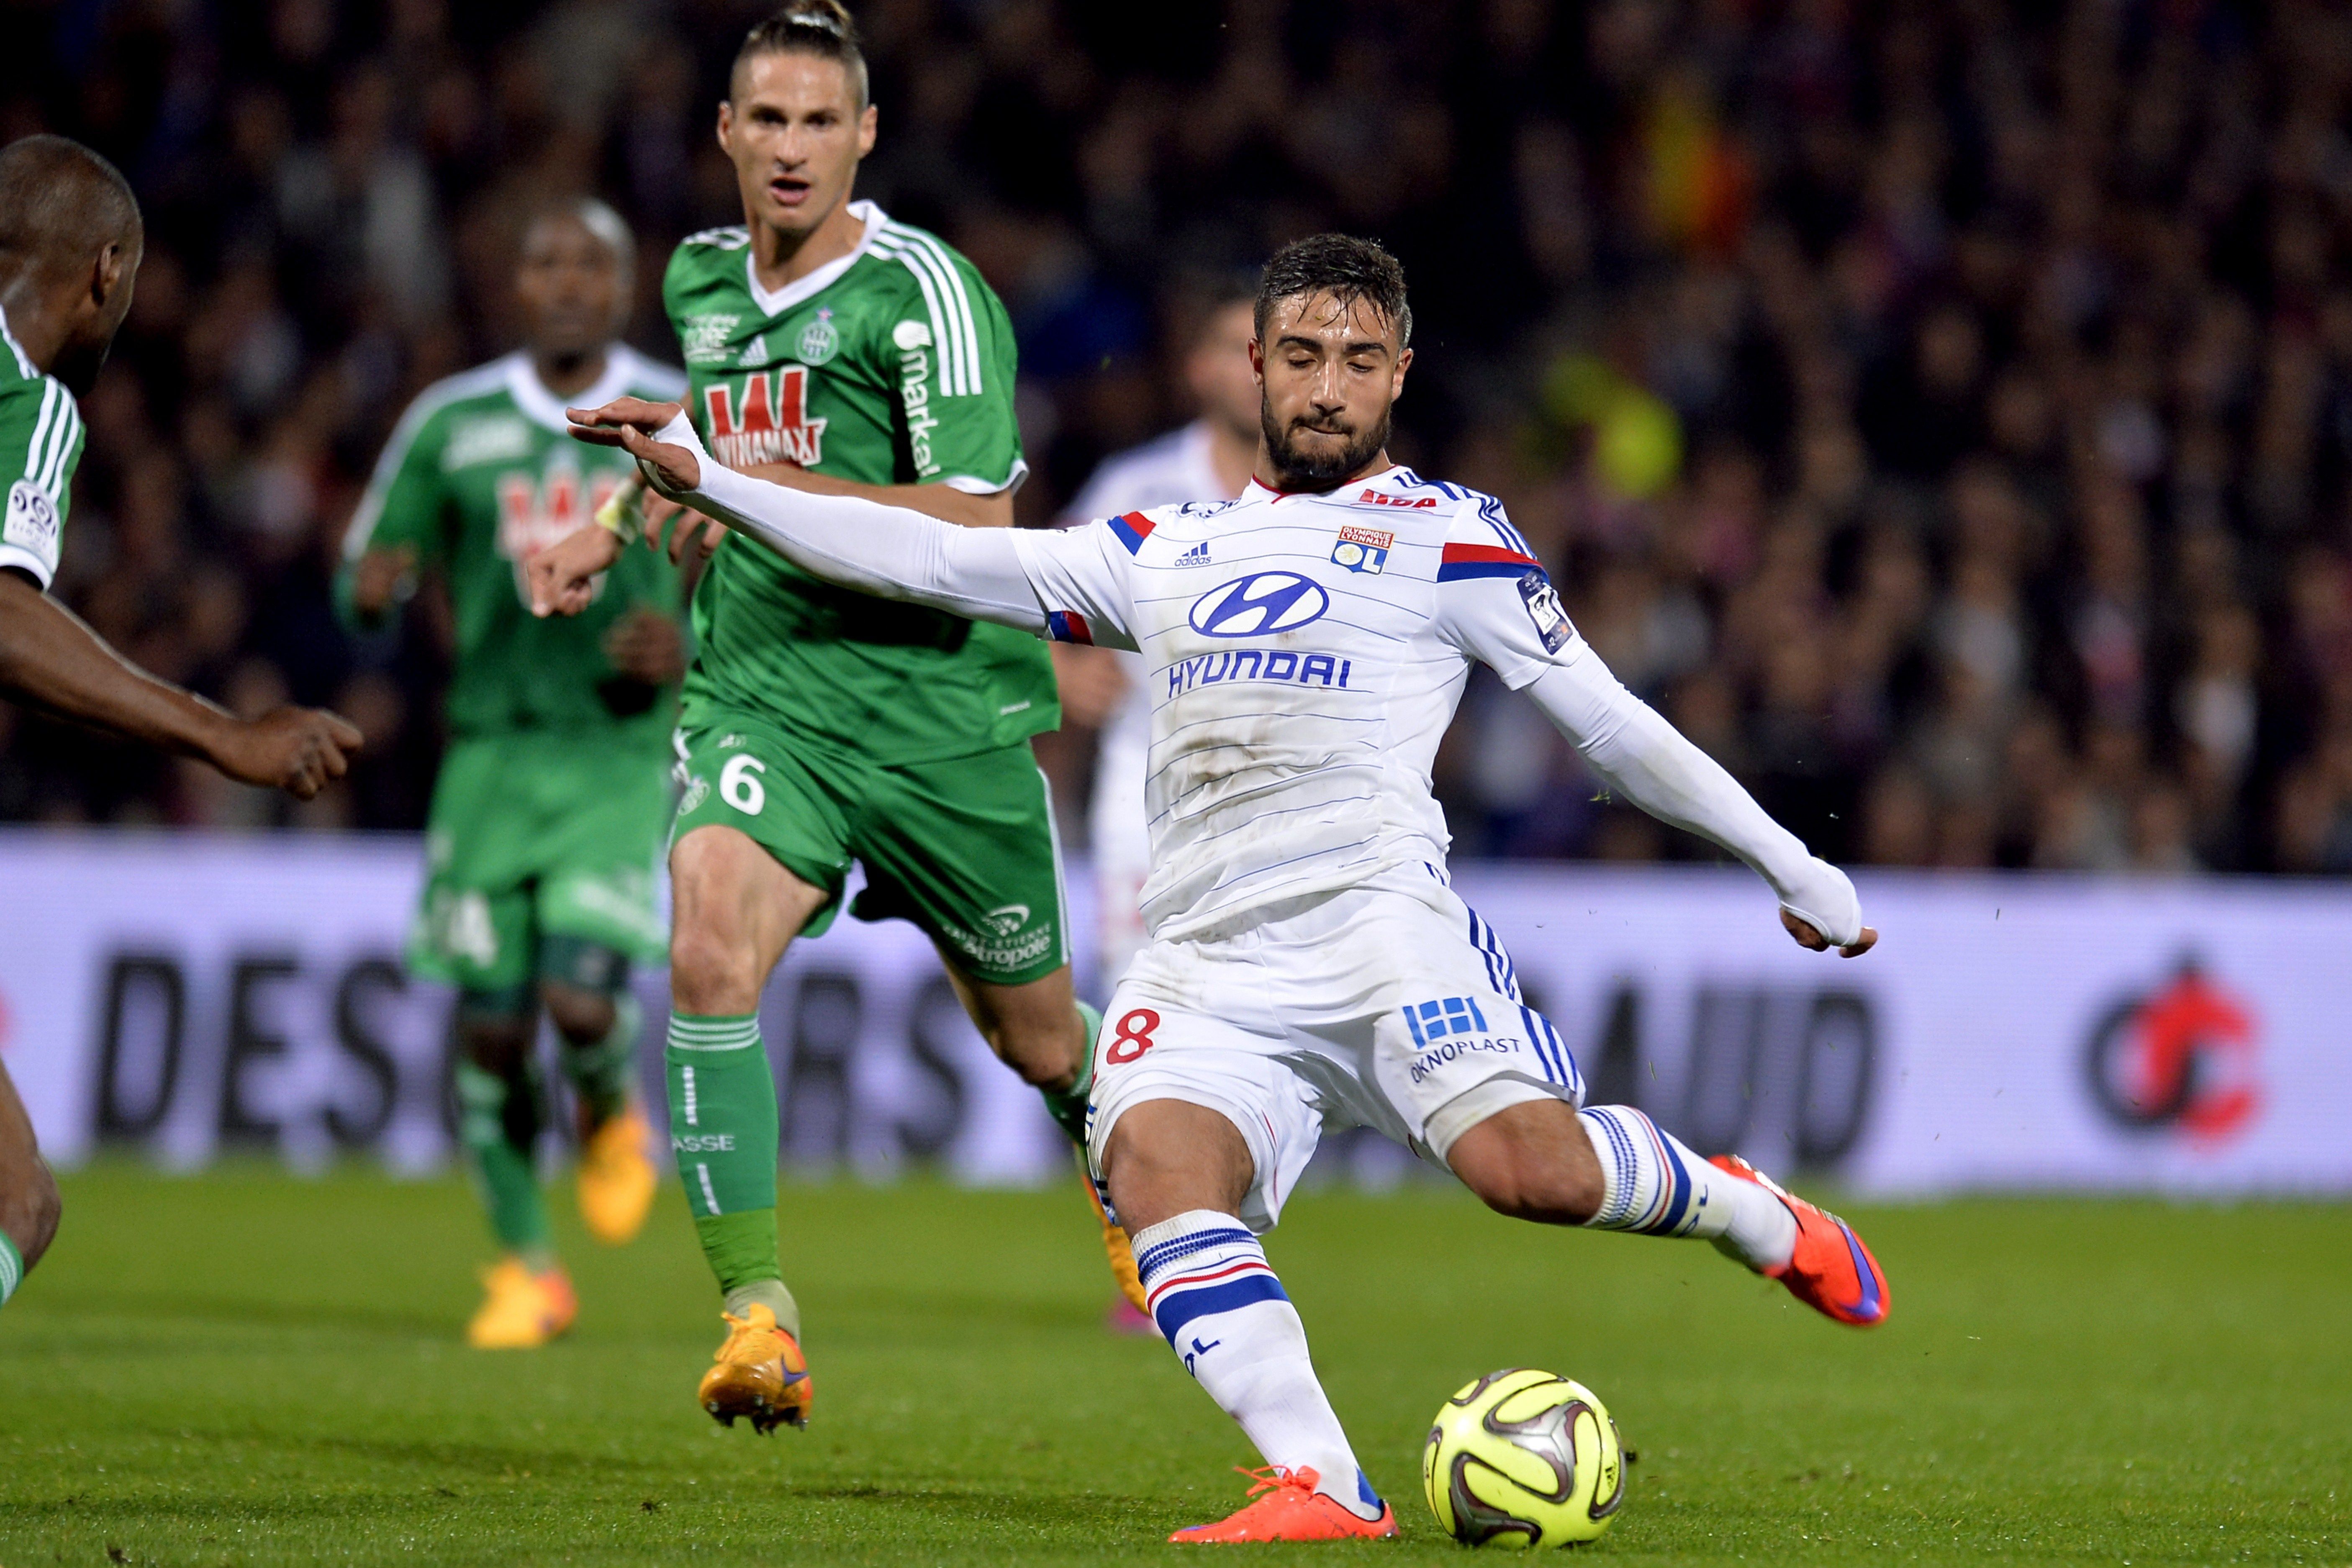 Mercato Player Profile: The next big French thing?